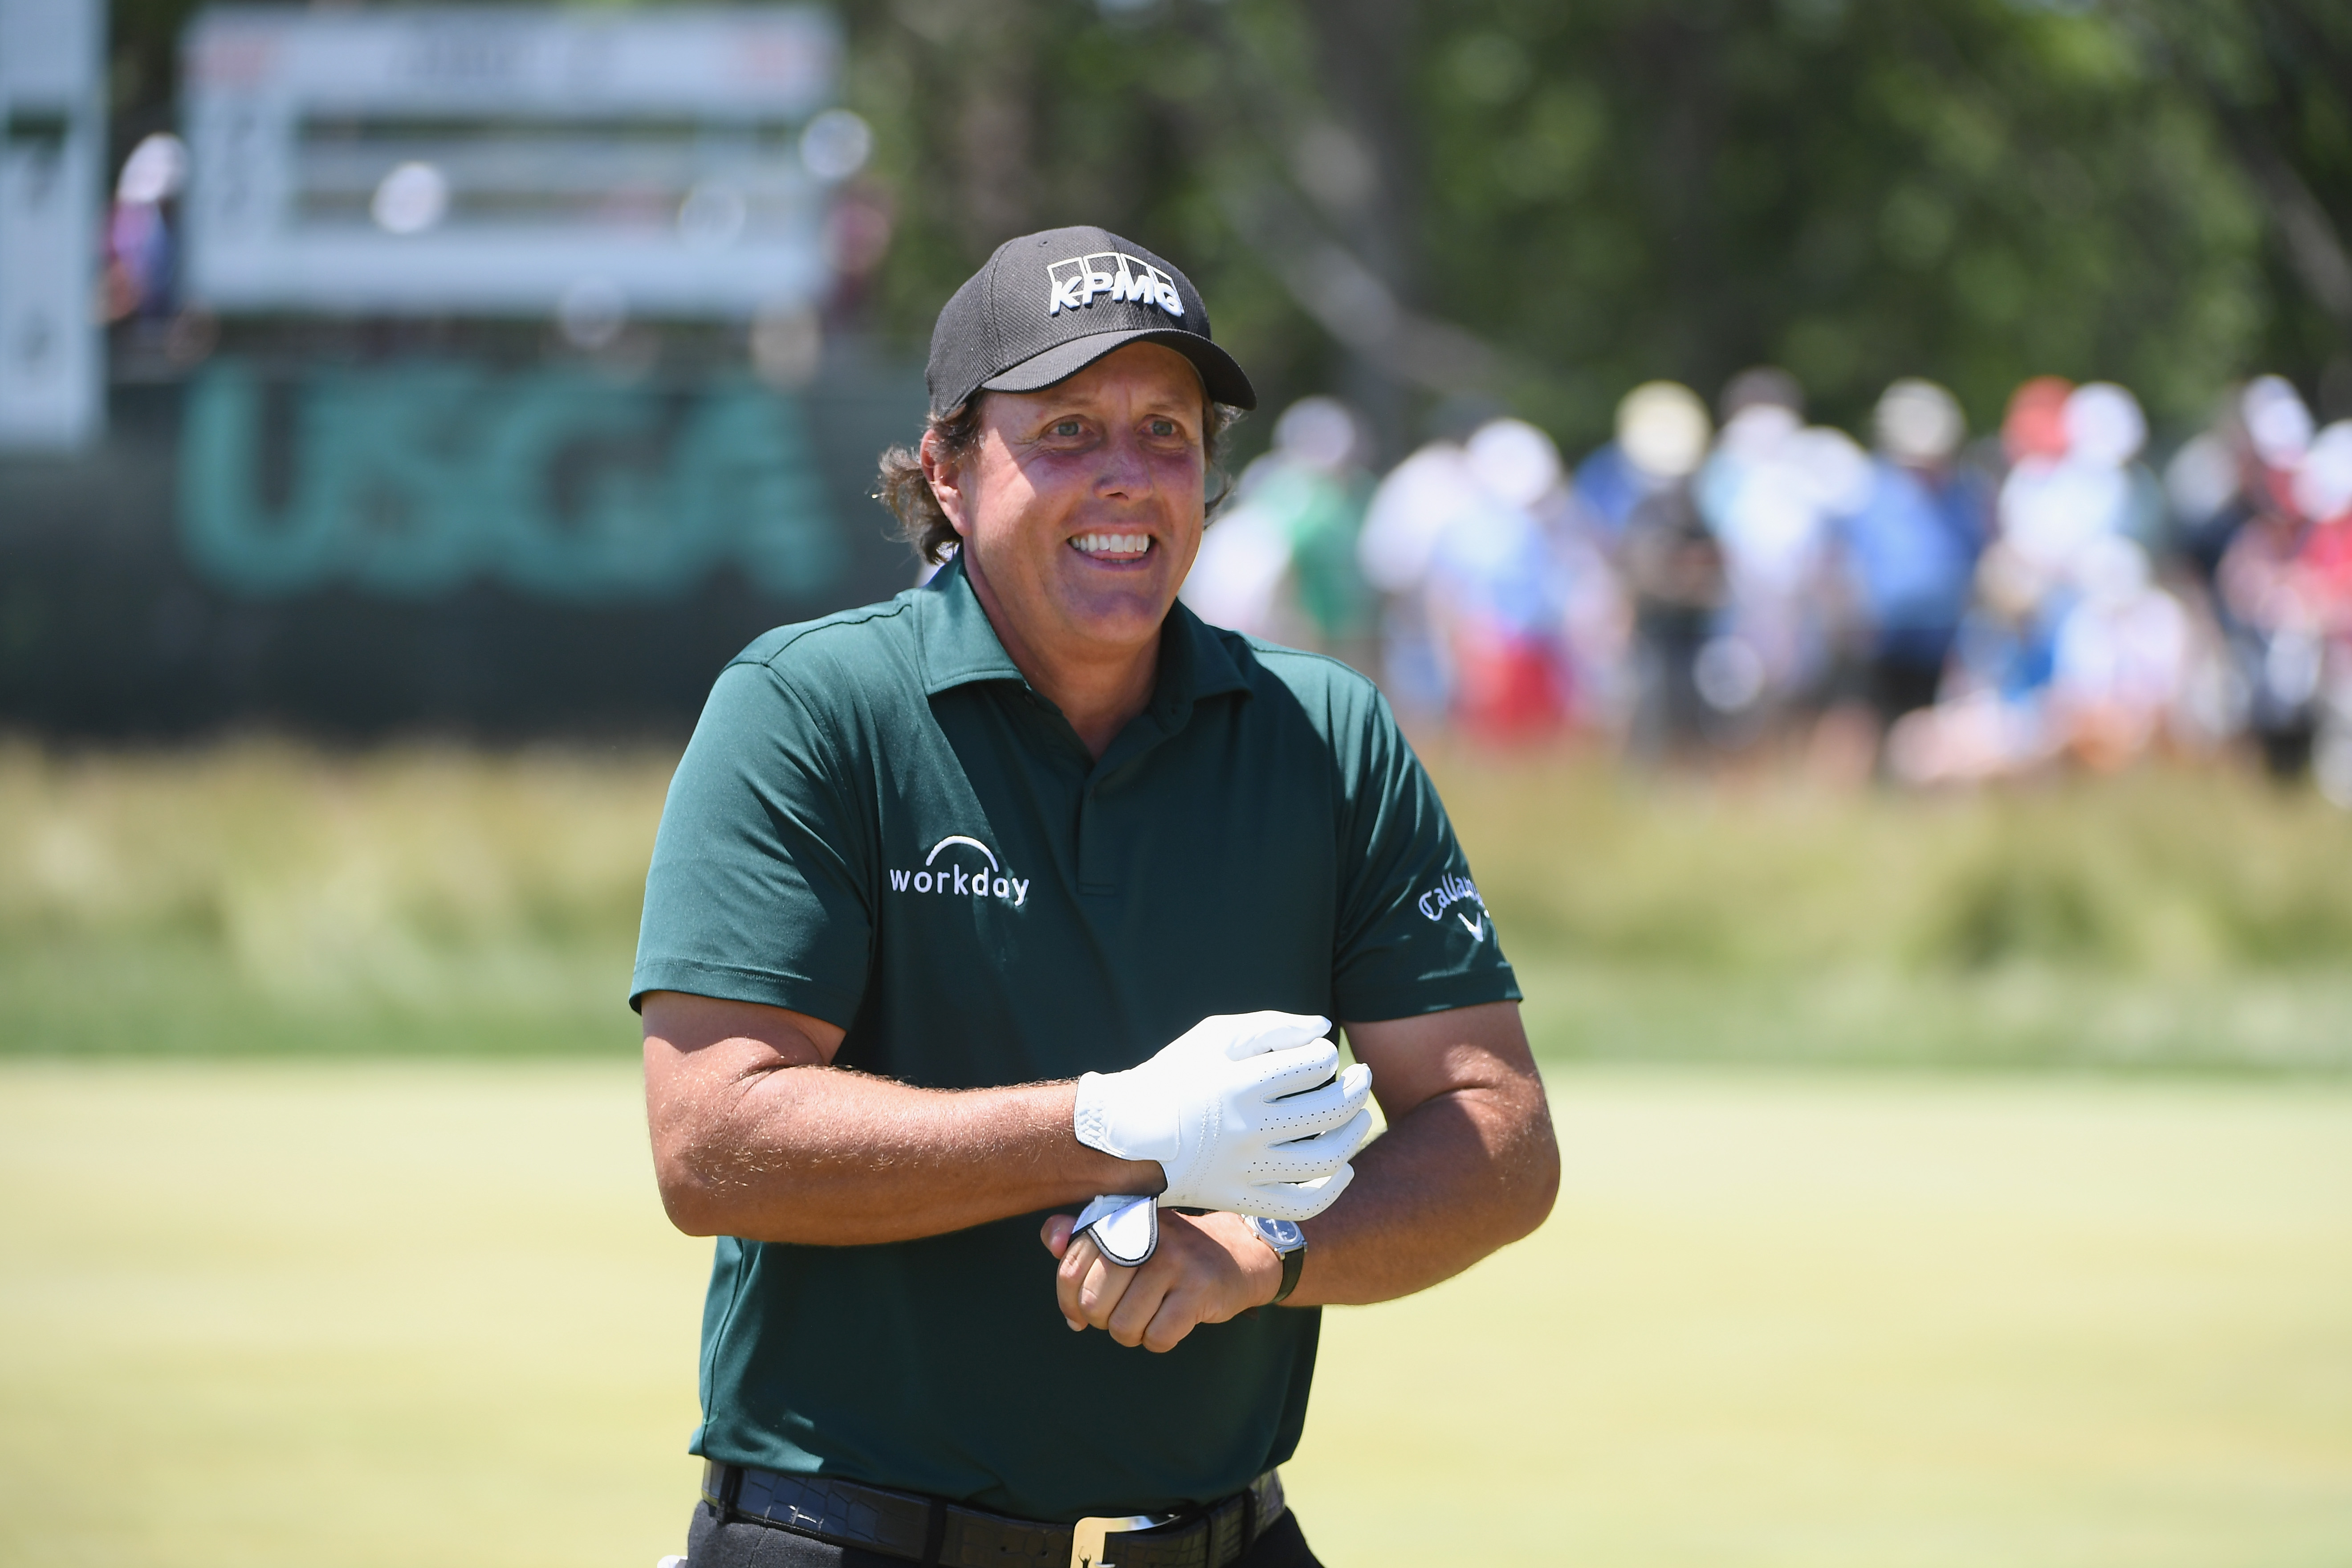 WATCH: Phil Mickelson takes 2-shot penalty for hitting a moving golf ball!